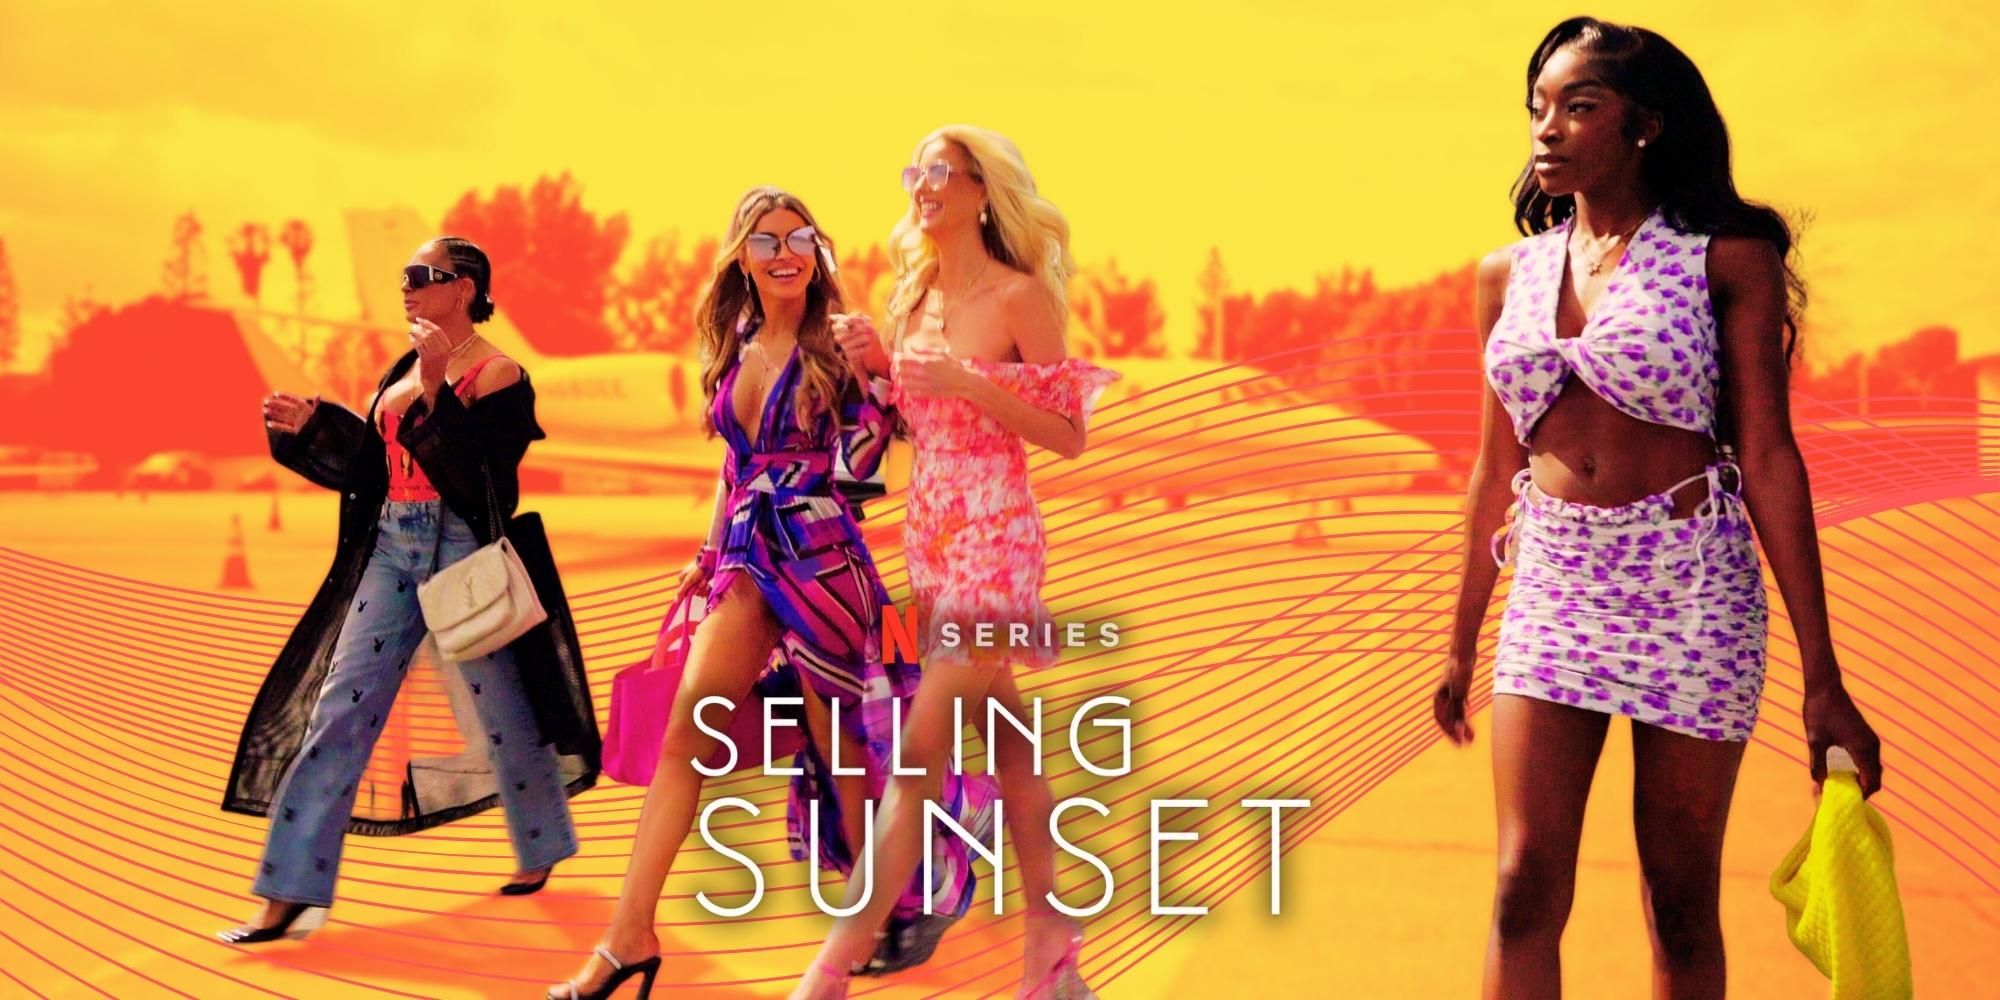 Here's When 'Selling Sunset' Season 6 Is Coming to Netflix